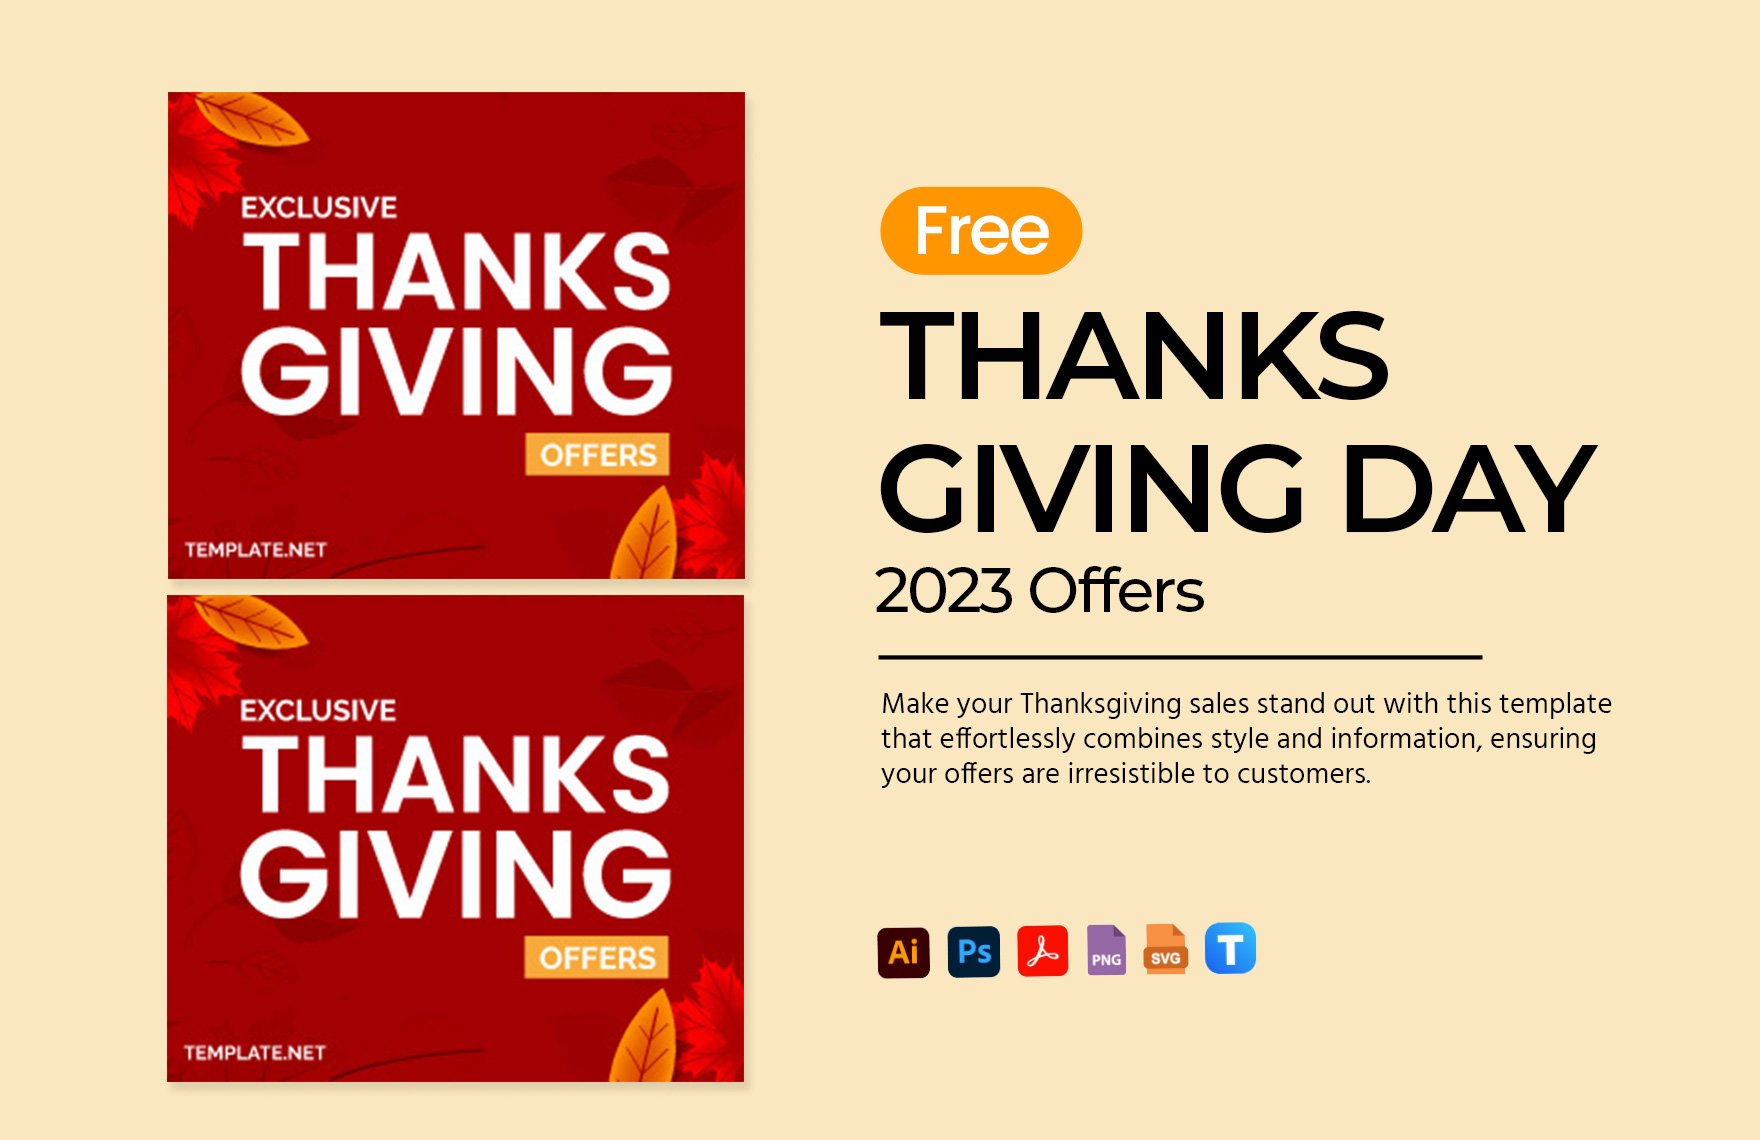 Free Thanksgiving Day 2023 Offers in PDF, Illustrator, PSD, SVG, PNG